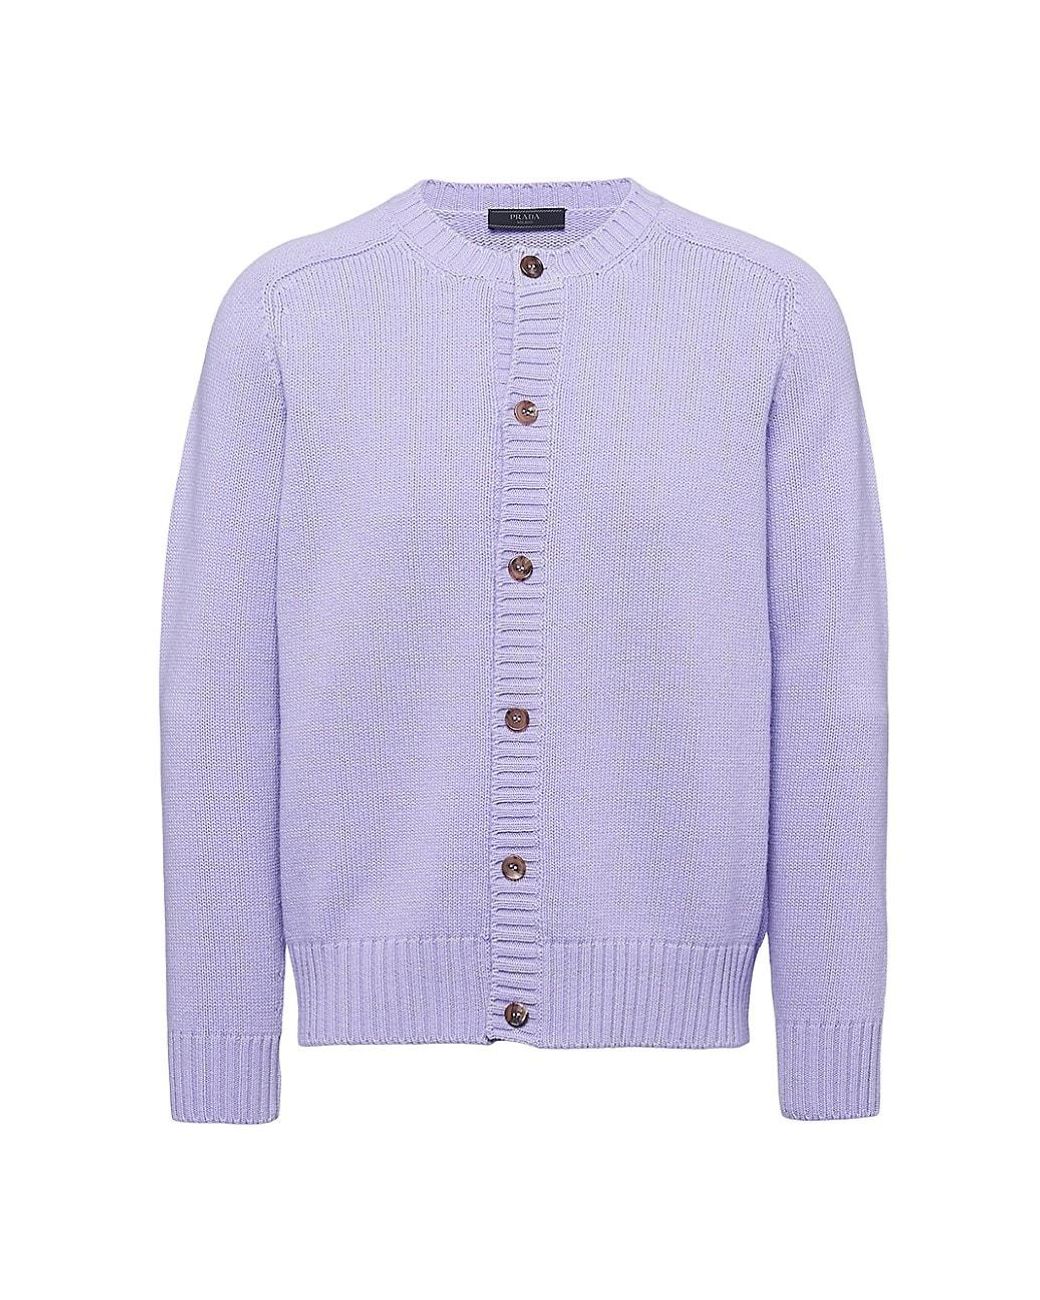 Prada Wool And Cashmere Cardigan in Purple for Men | Lyst